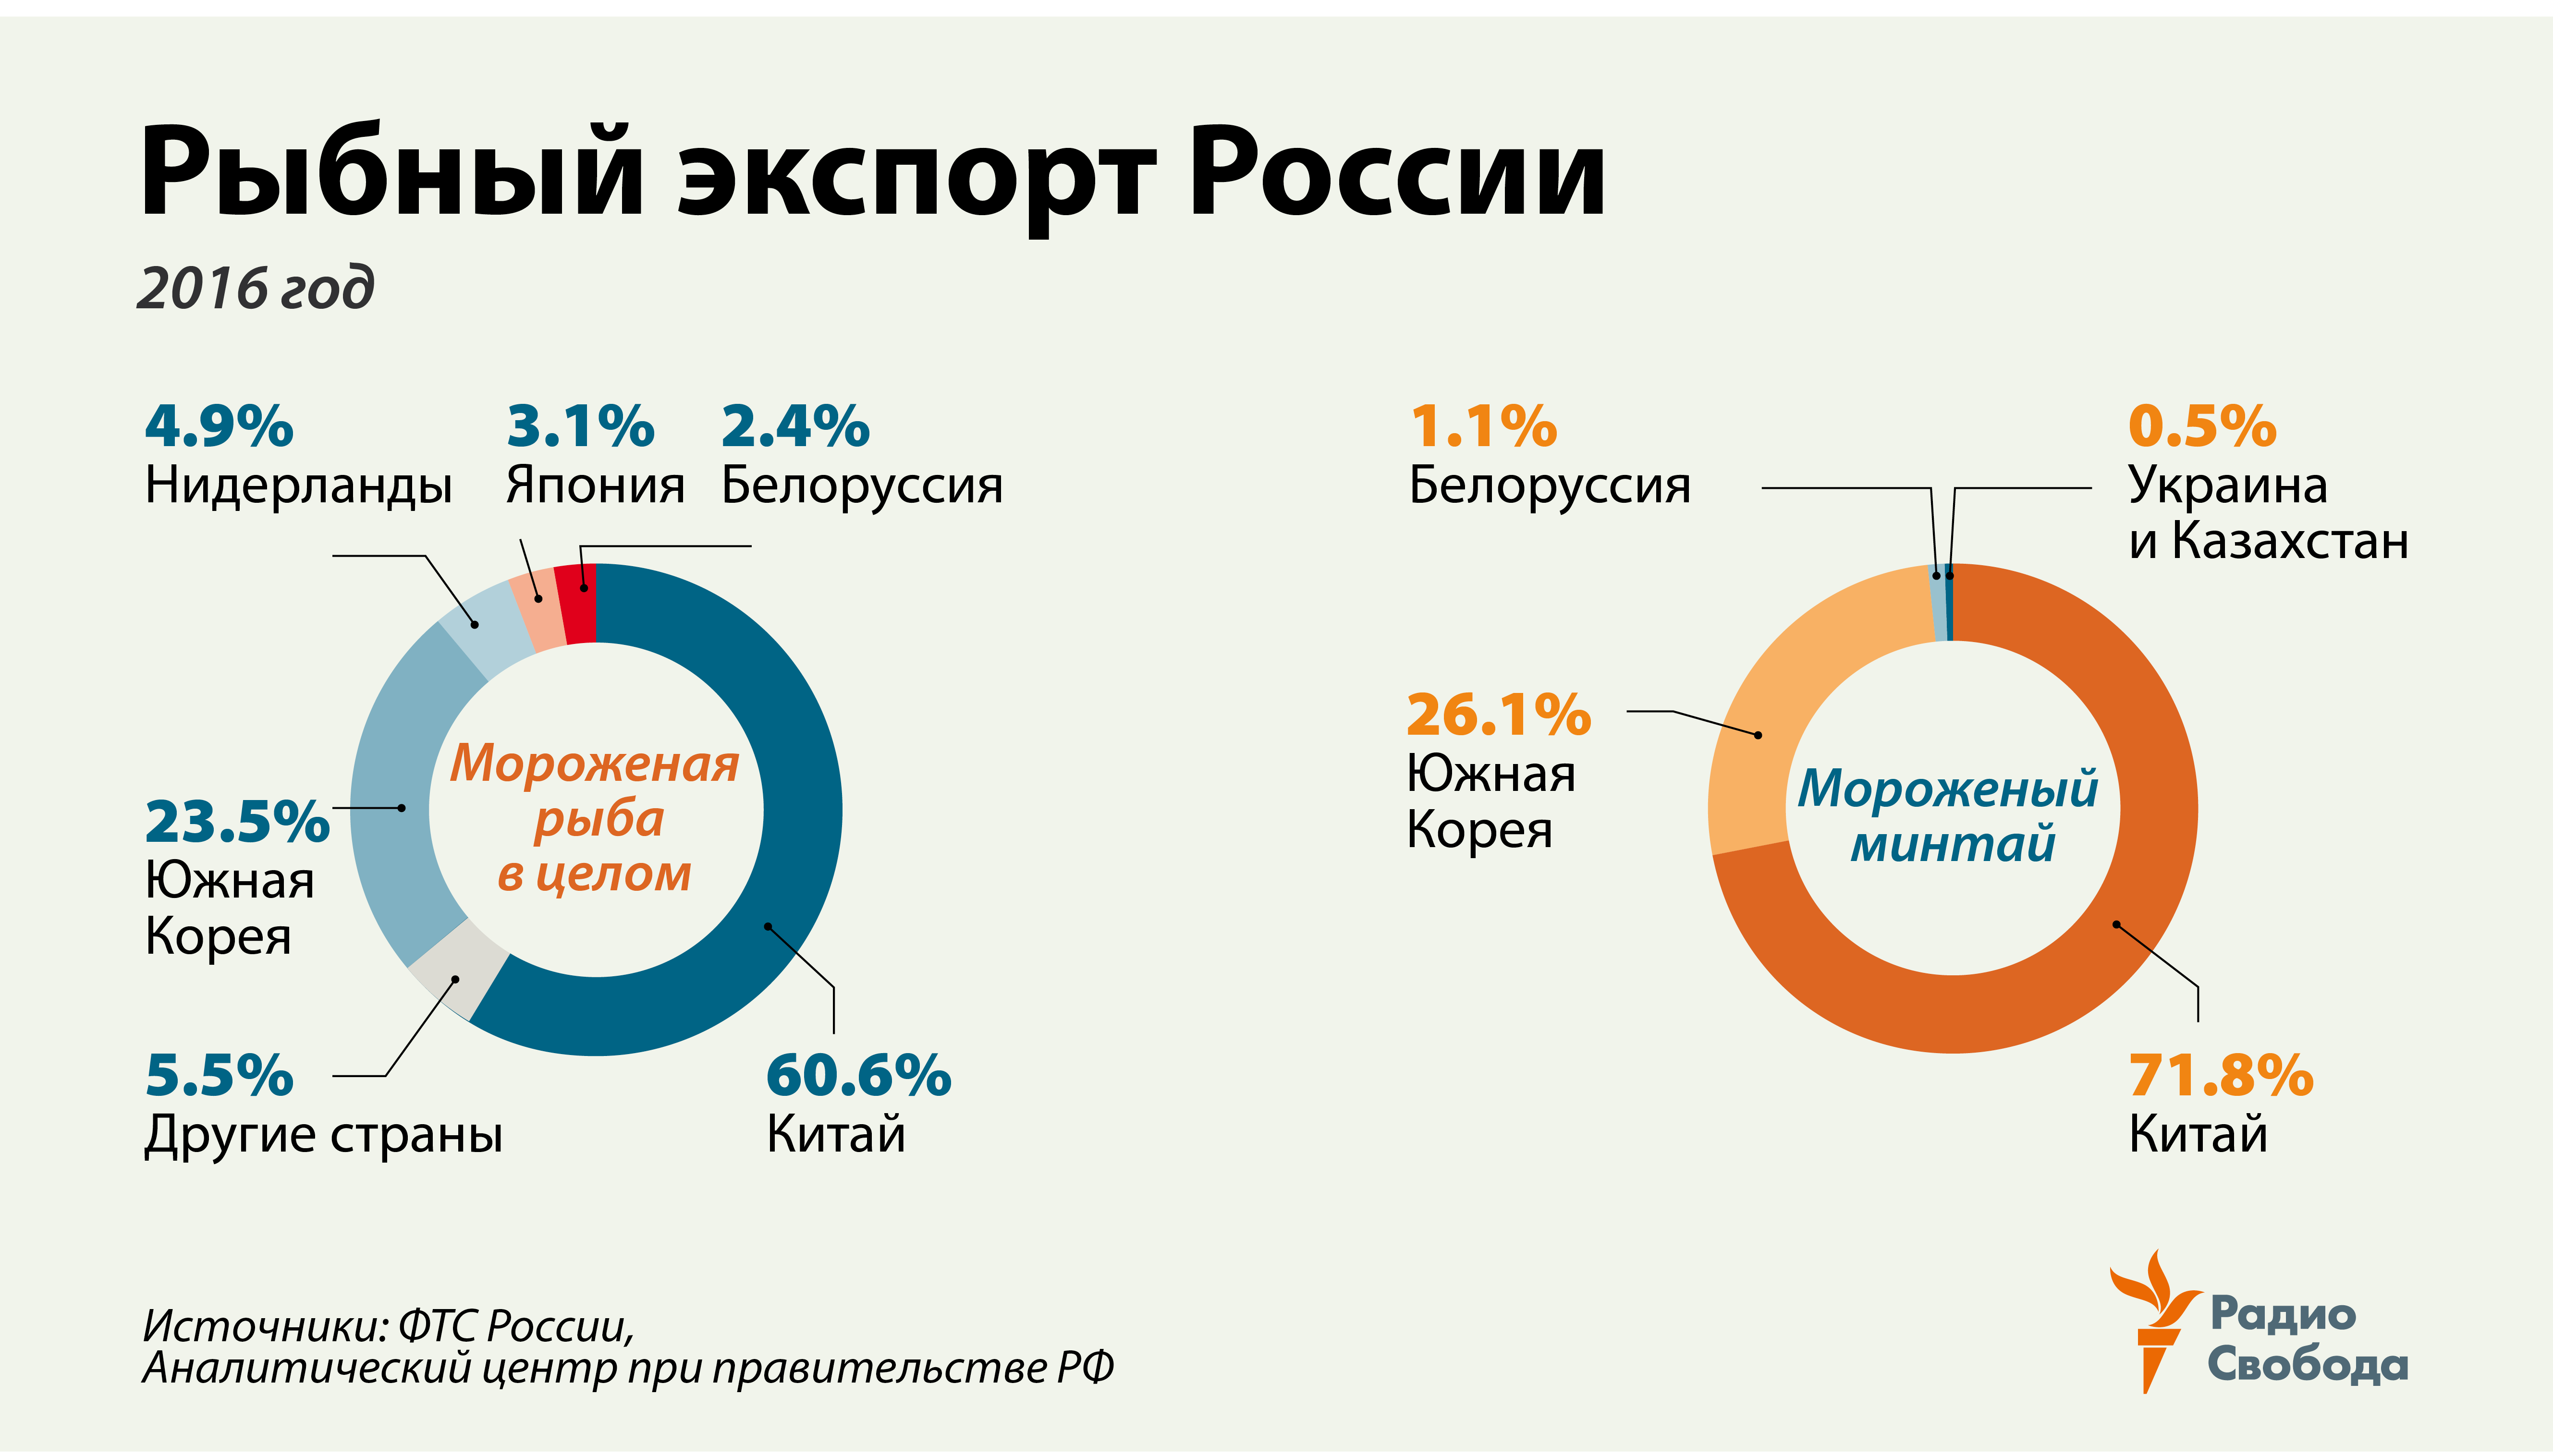 Russia-Factograph-Fishery-Export Structure-2016